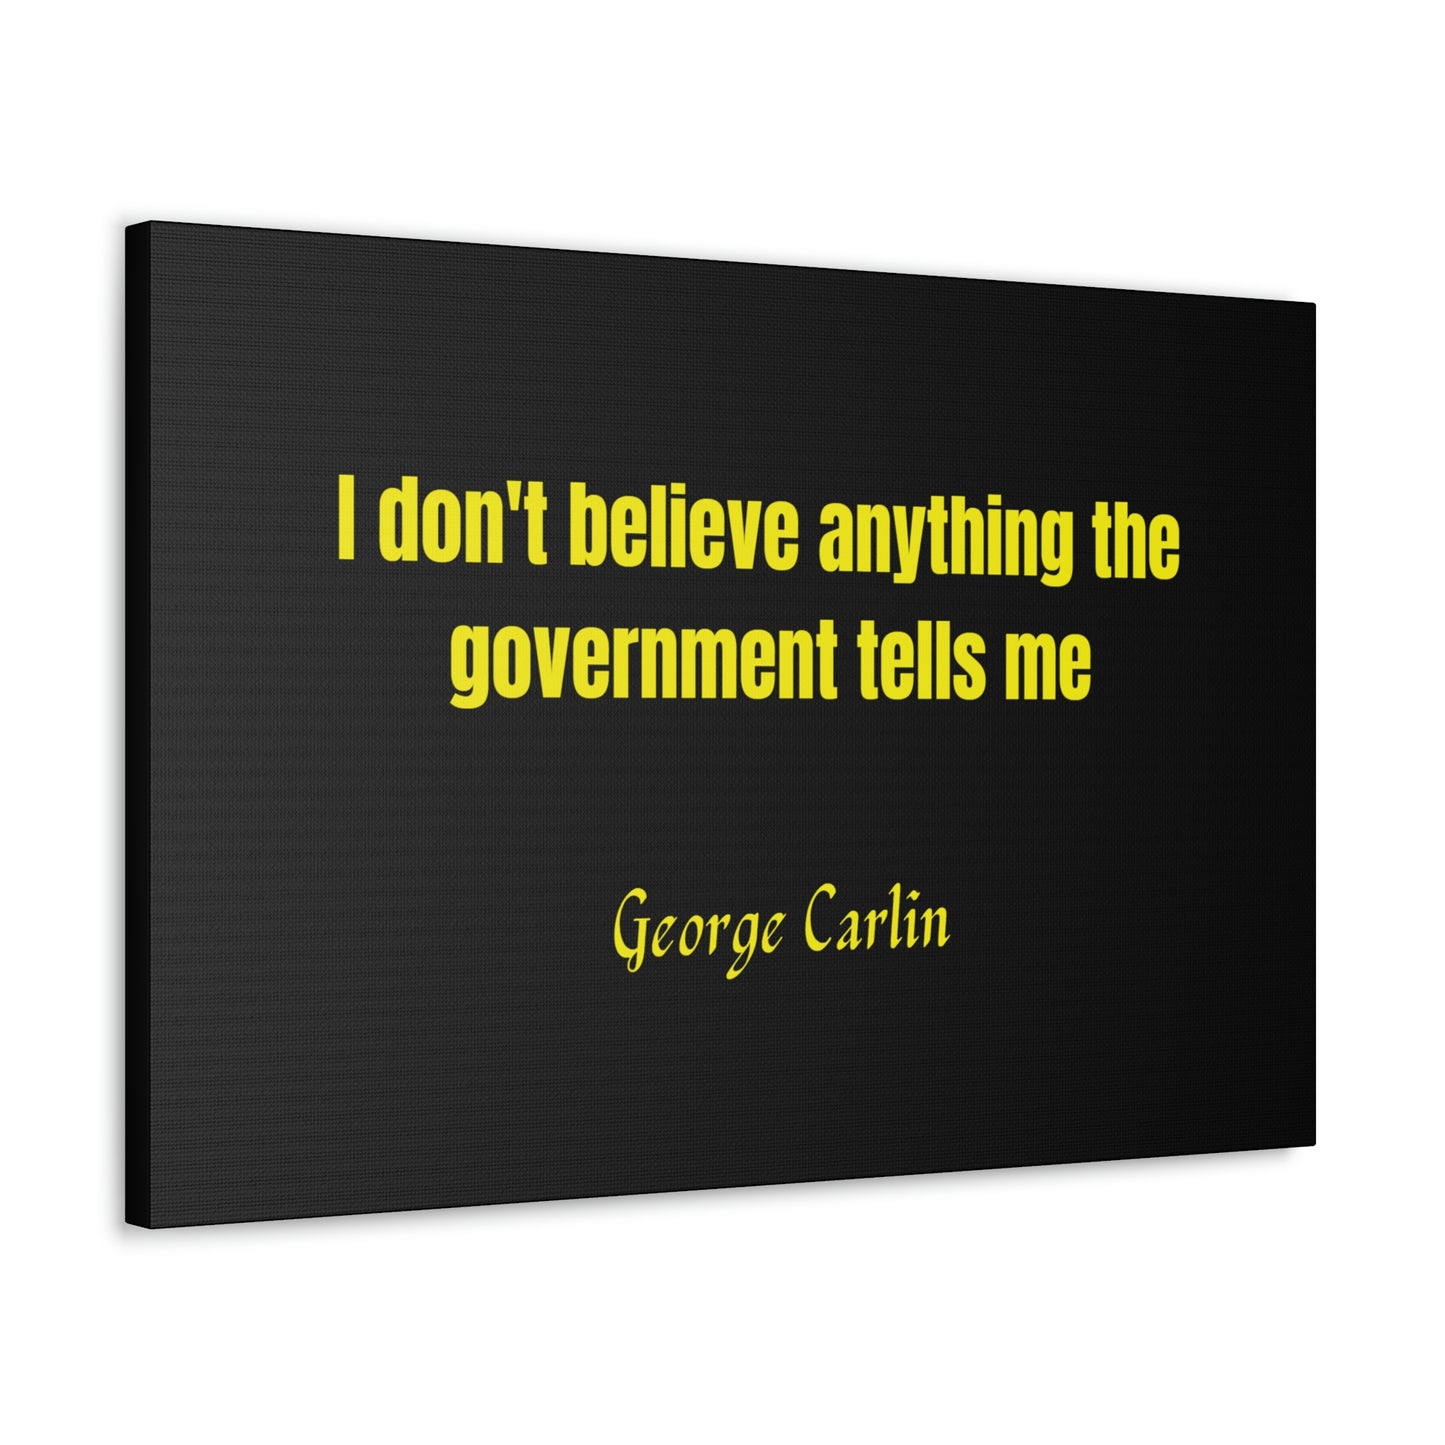 George Carlin Quoted Canvas